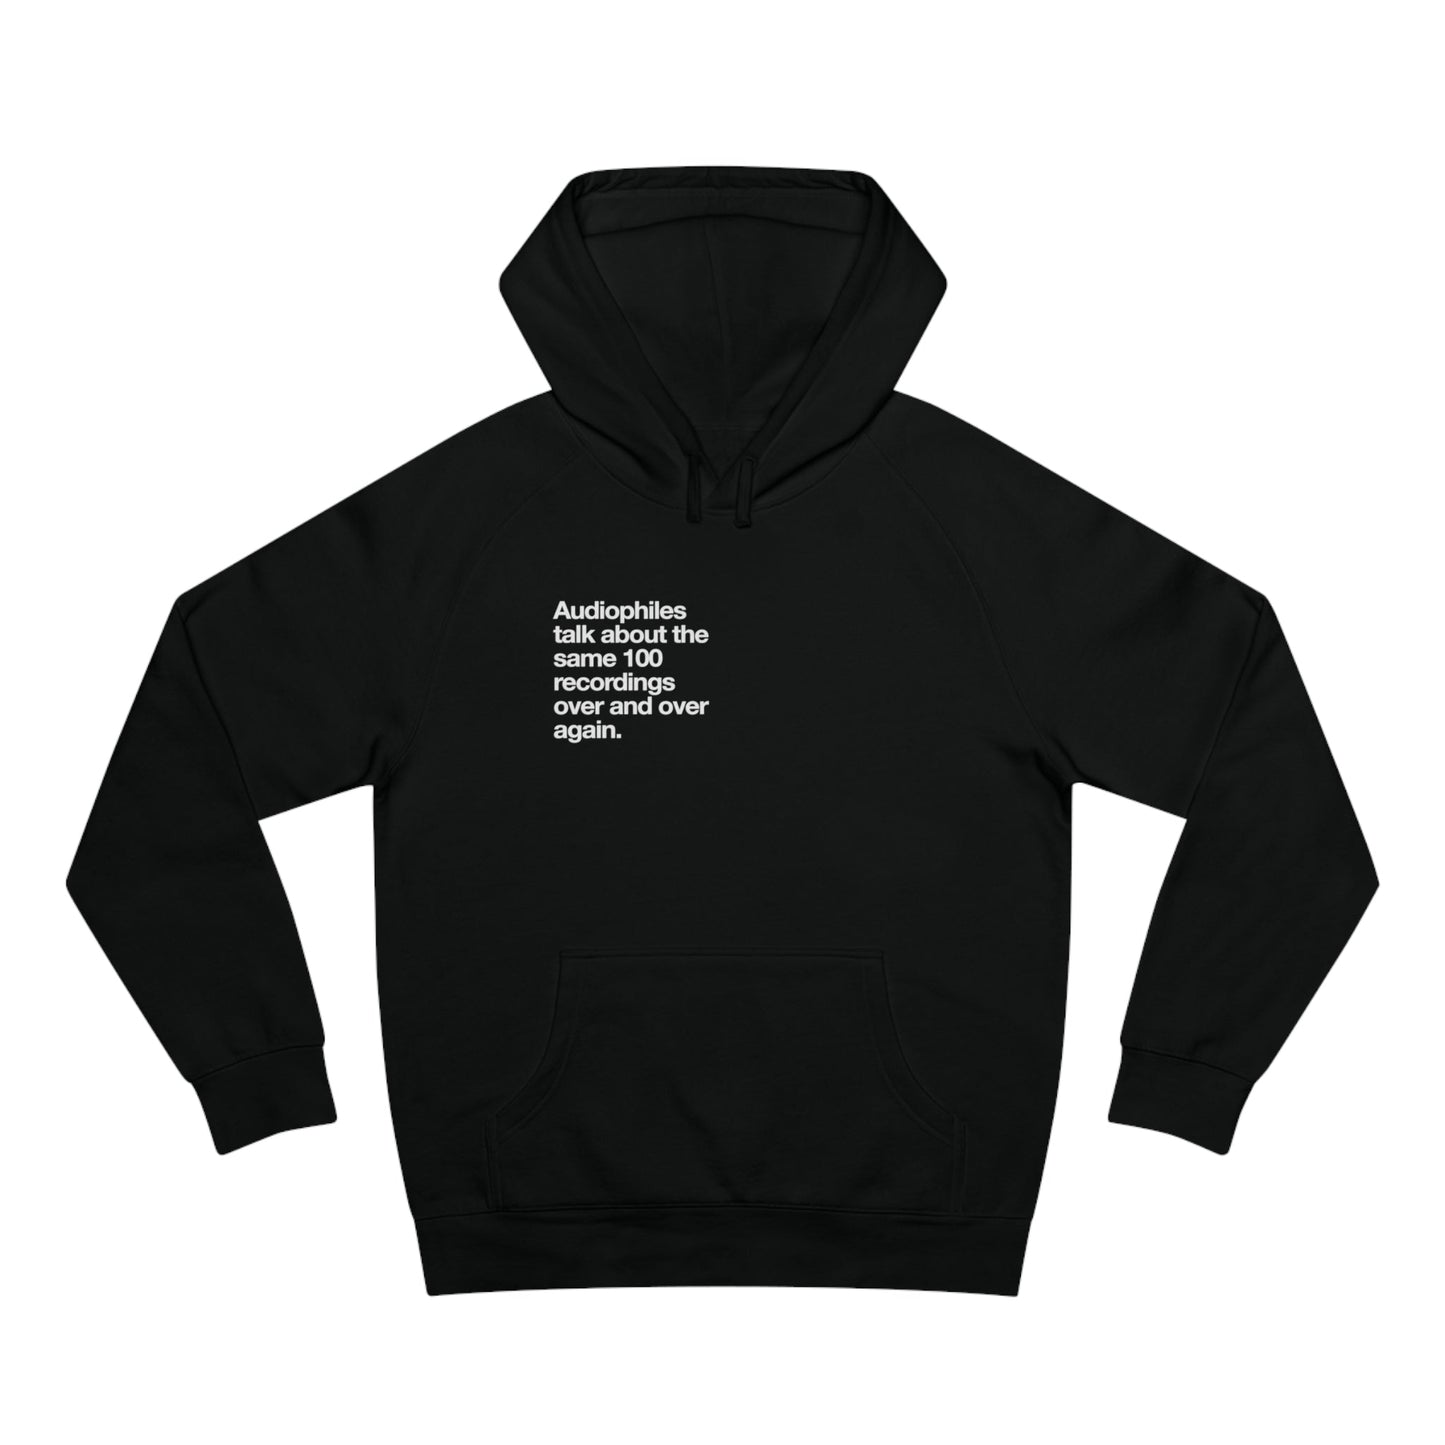 Audiophiles talk about the same 100 records over and over again hoodie - Pure Neo Shop